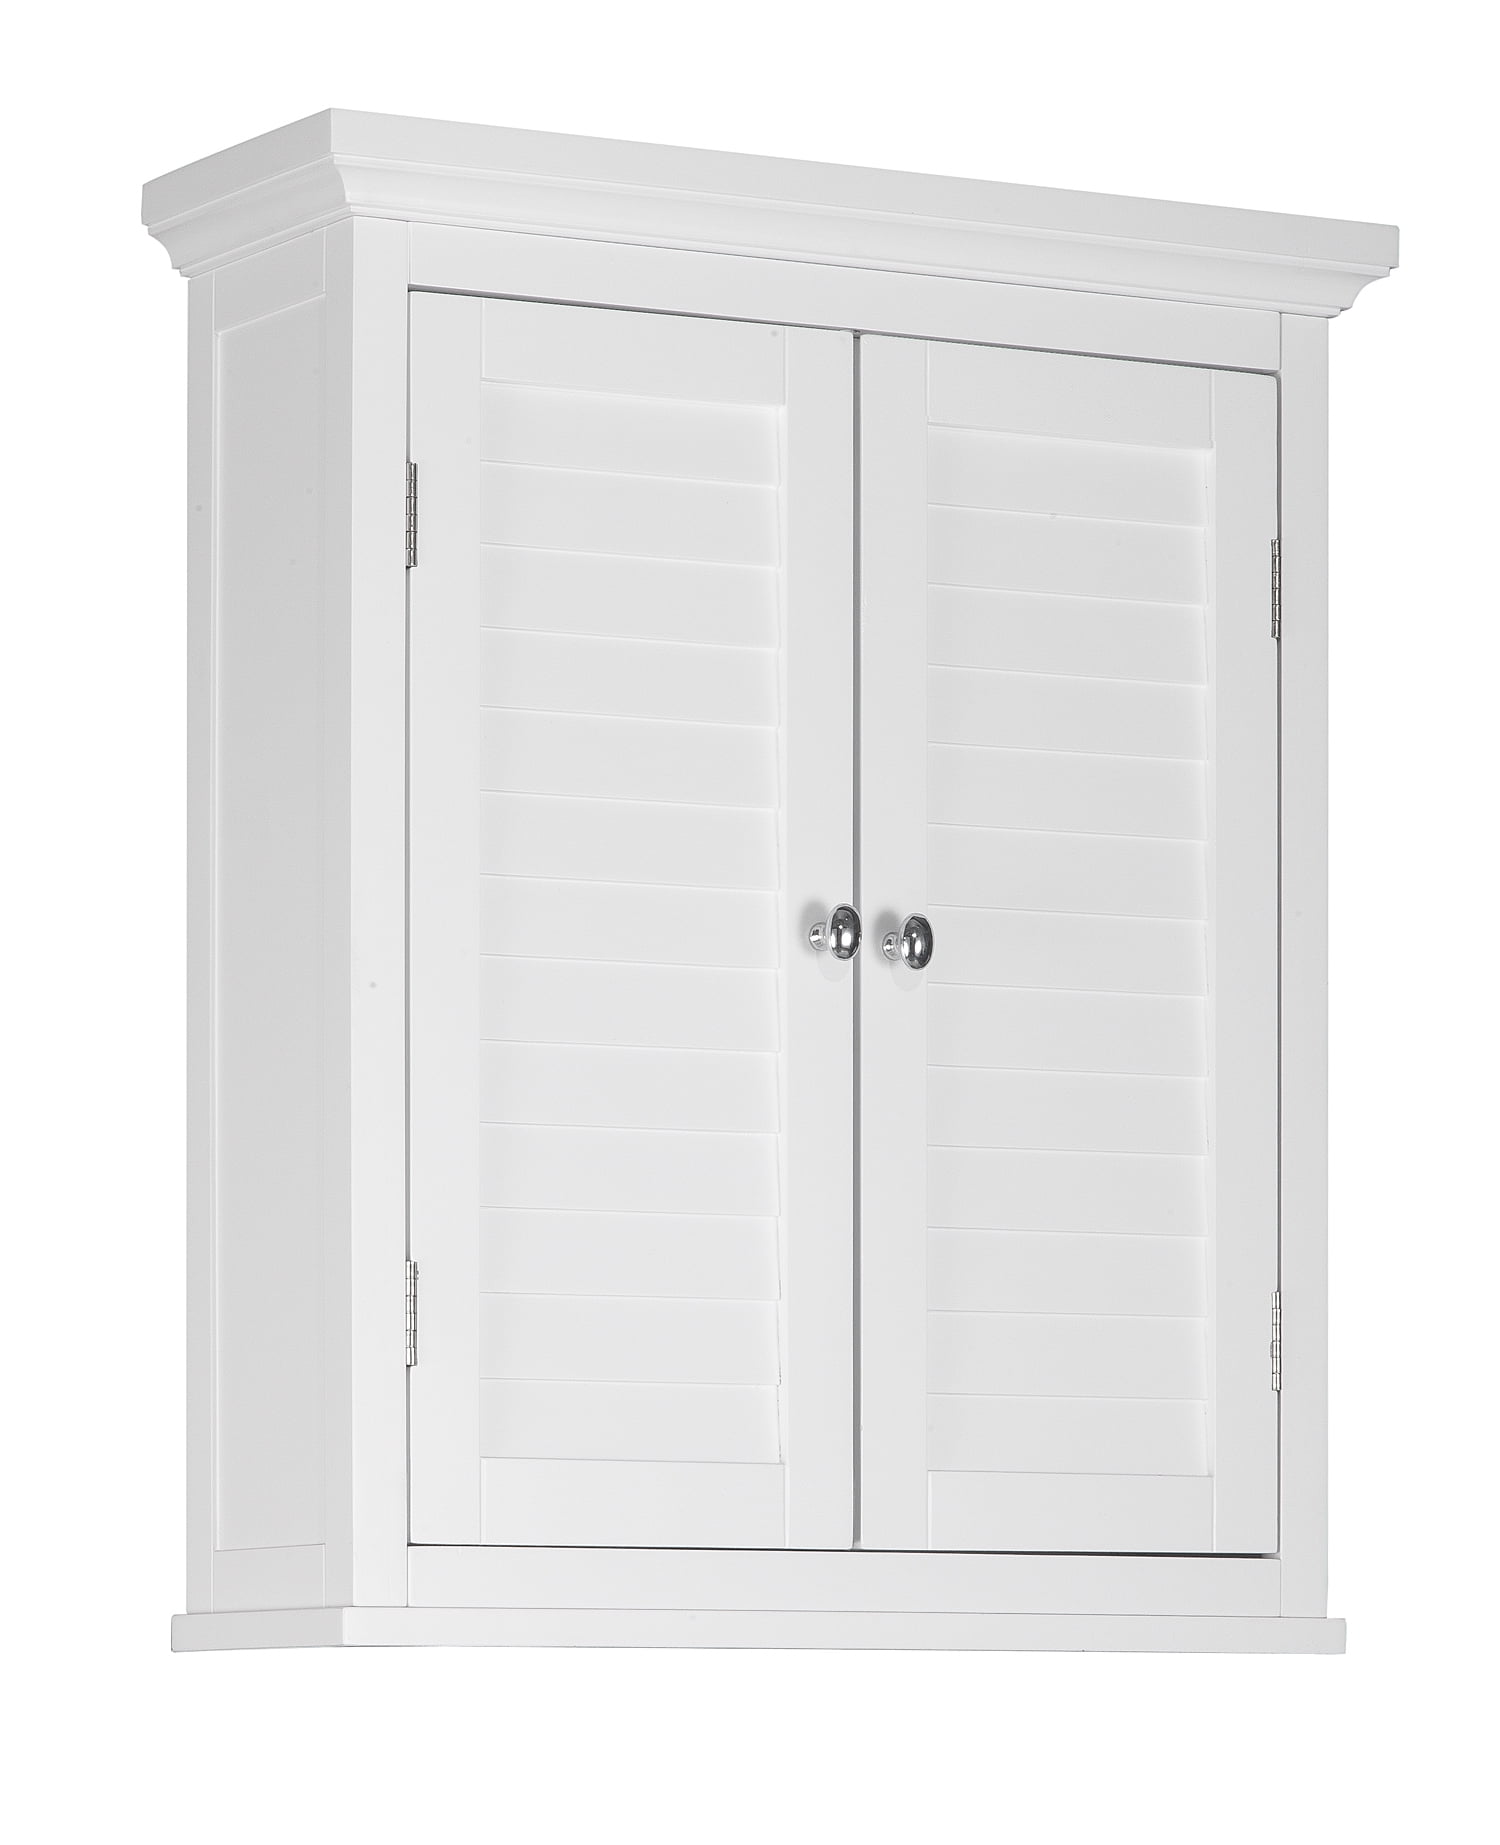 Elegant Home Fashions Dawson 1-door Wall Cabinet in White for sale online 